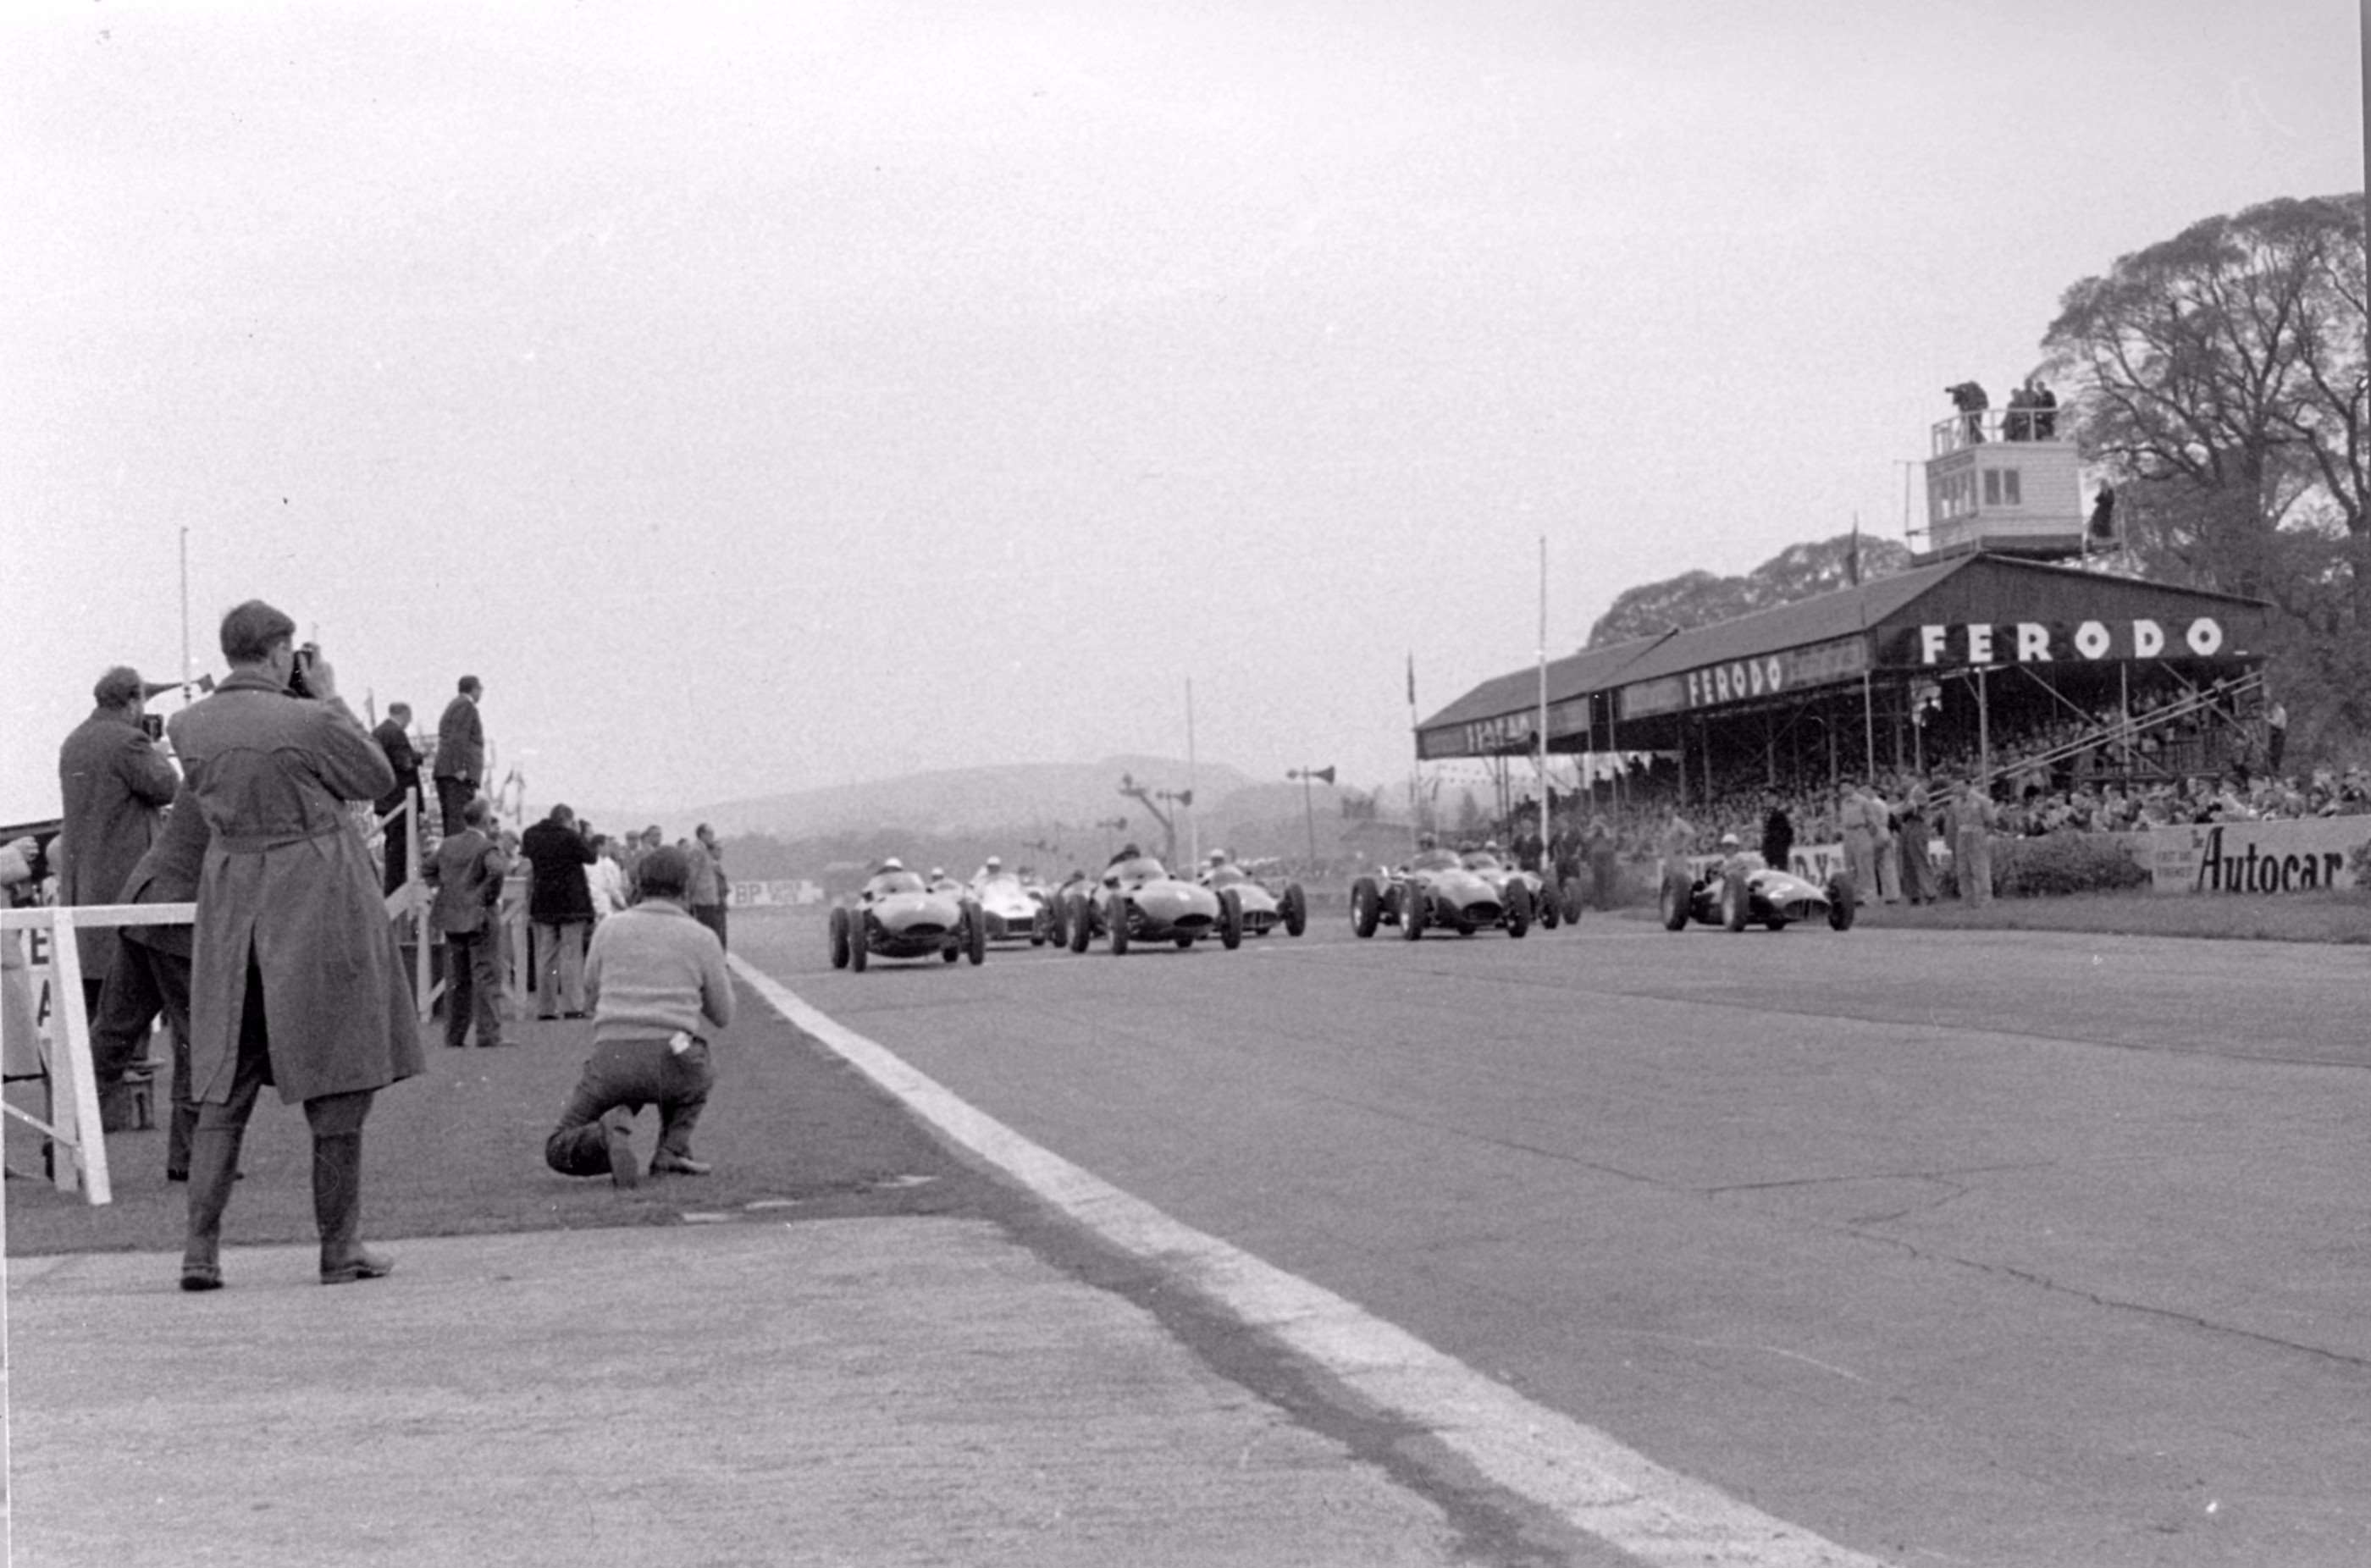 1957 Goodwood Easter Monday - the Vanwalls of Moss and Brooks 1-2 on the starting grid for the Glover Trophy feature Formula 1 race